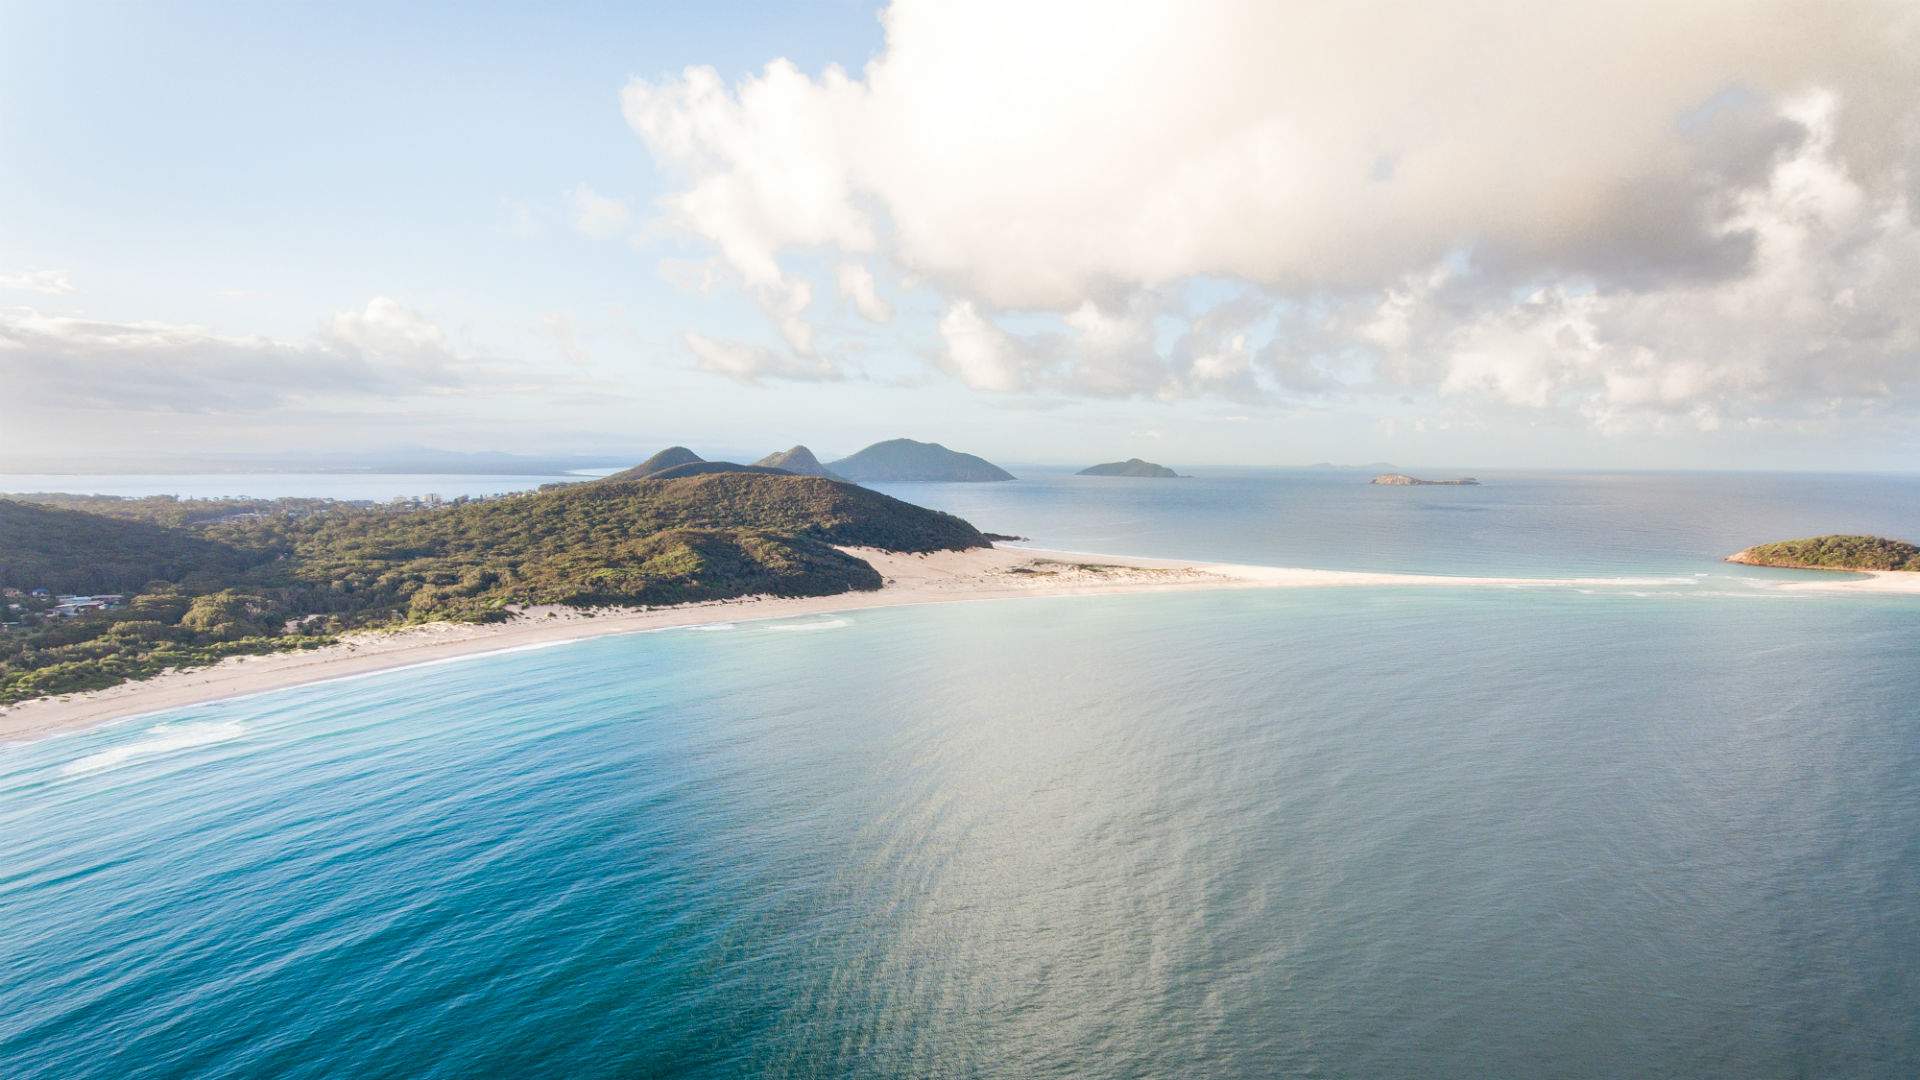 We're Giving Away the Ultimate Luxury Weekend at the New Bannisters Port Stephens